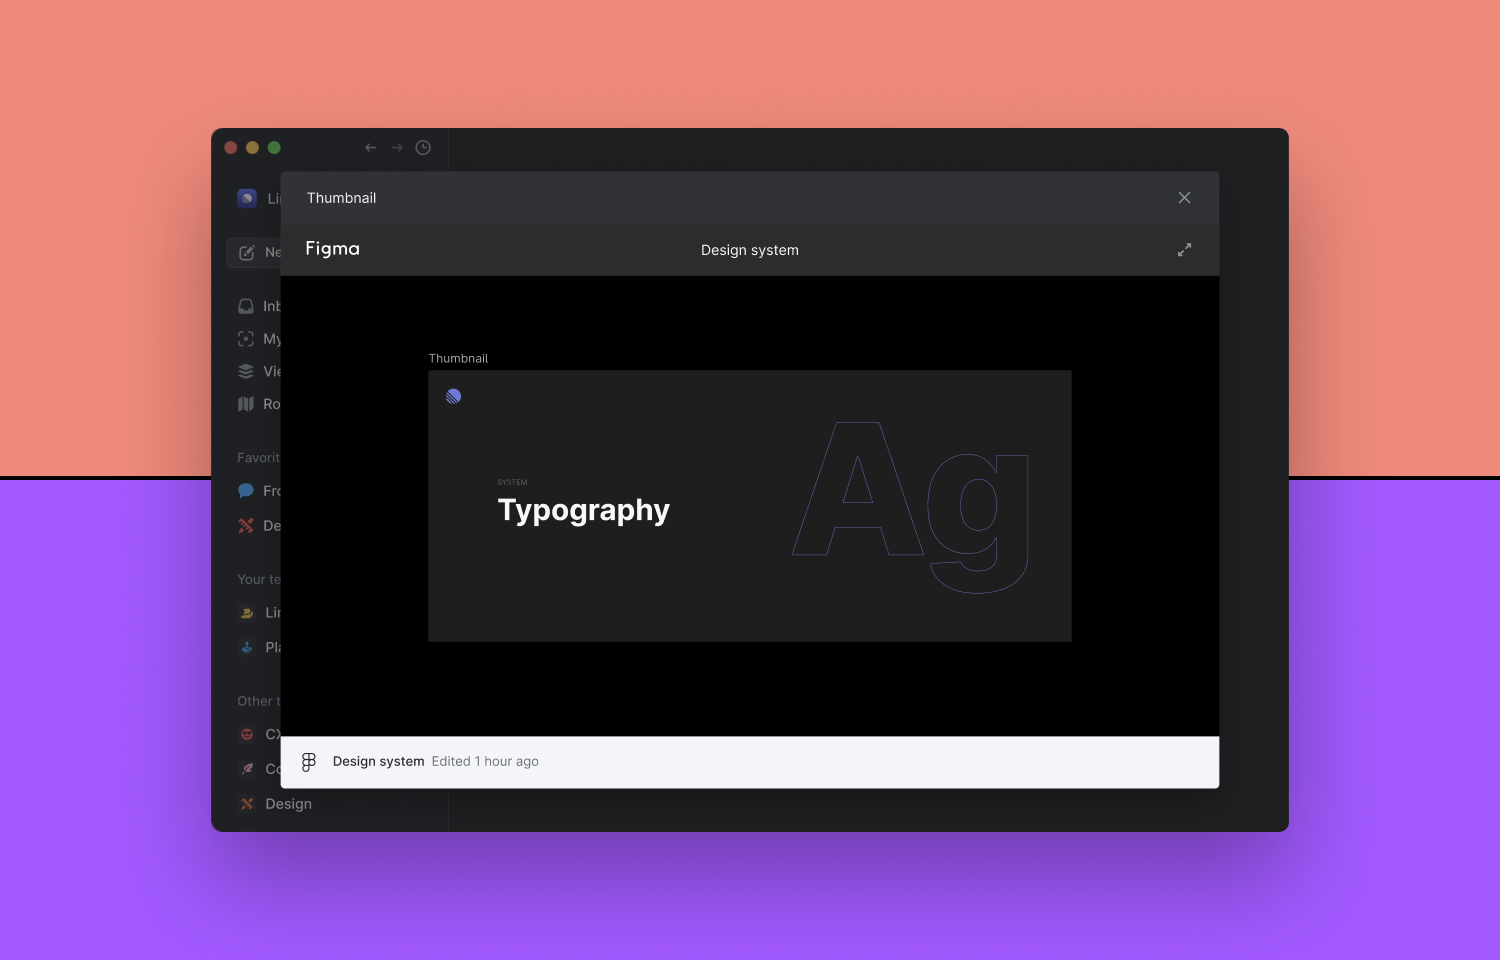 An expanded Figma embed, focused on a frame called "Typography".